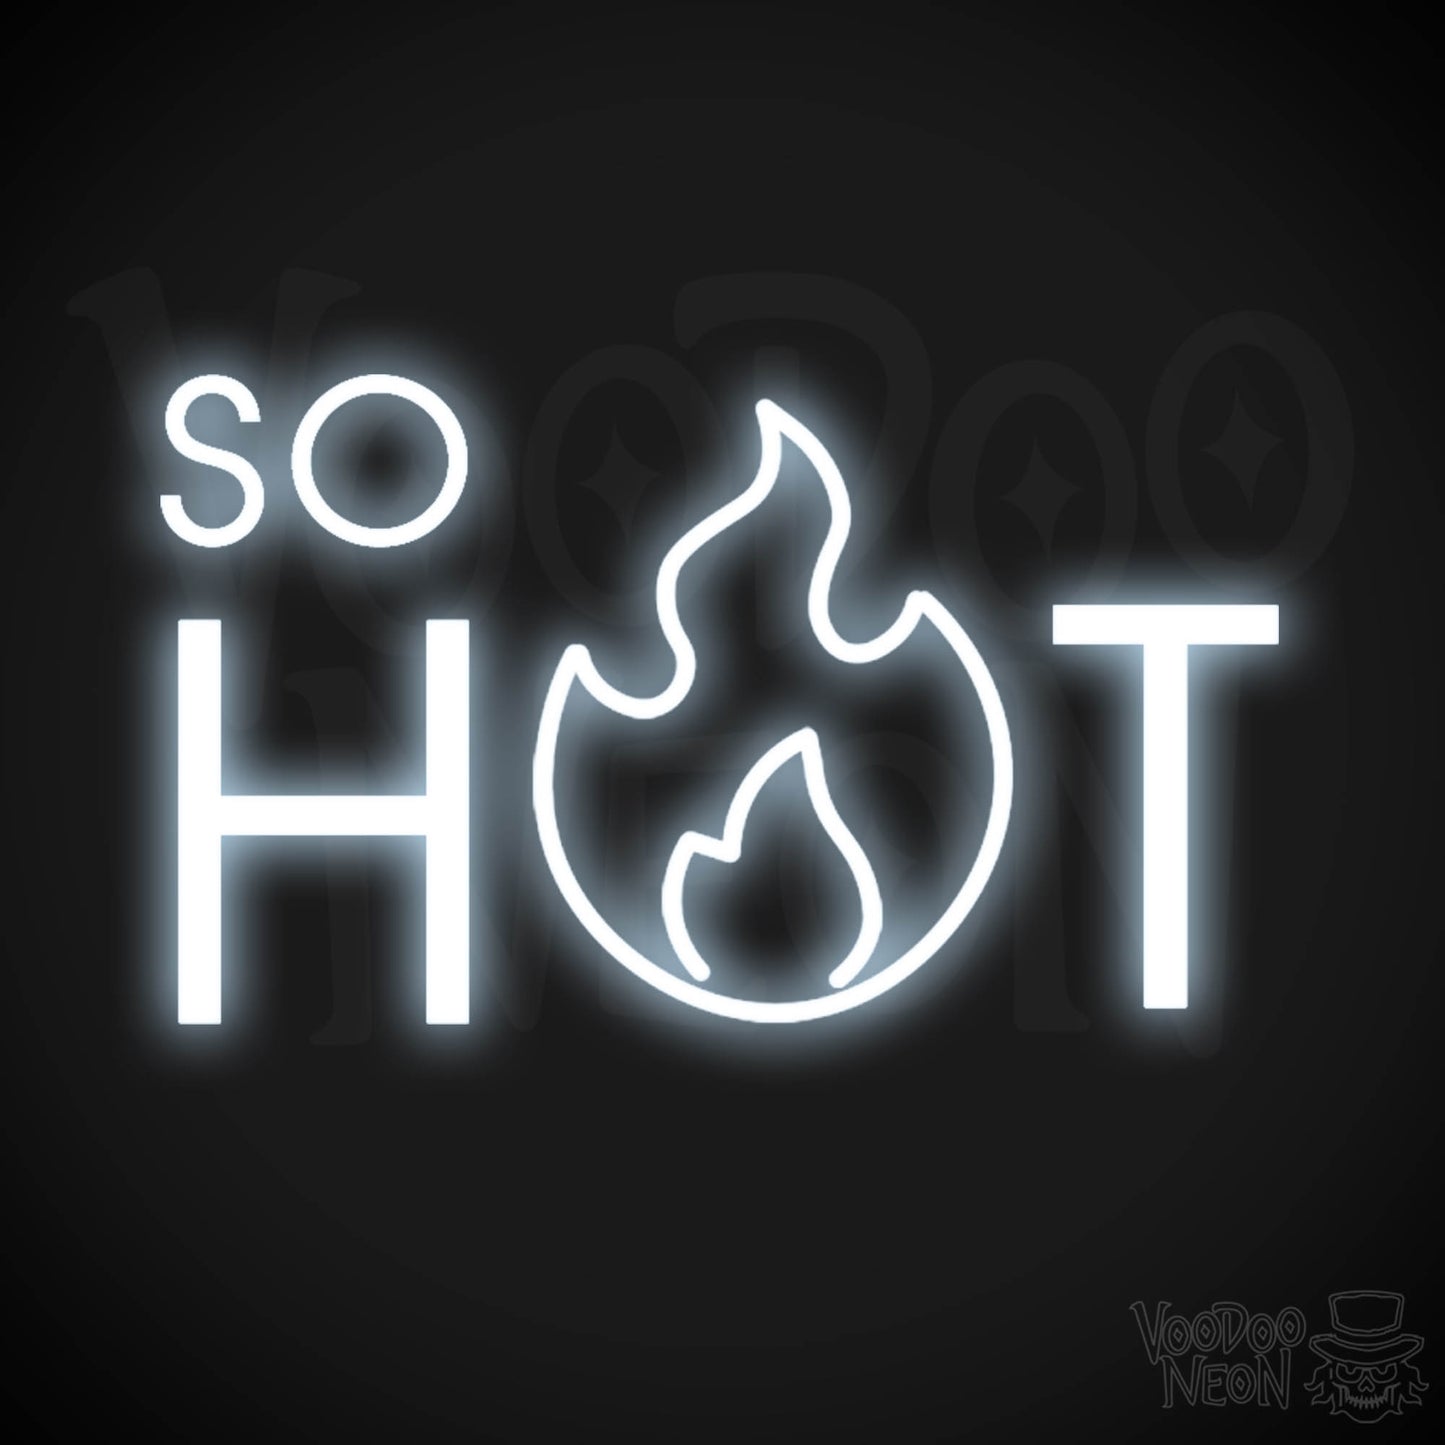 So Hot Neon Sign - Neon So Hot Sign - LED Neon Wall Art - Color Cool White